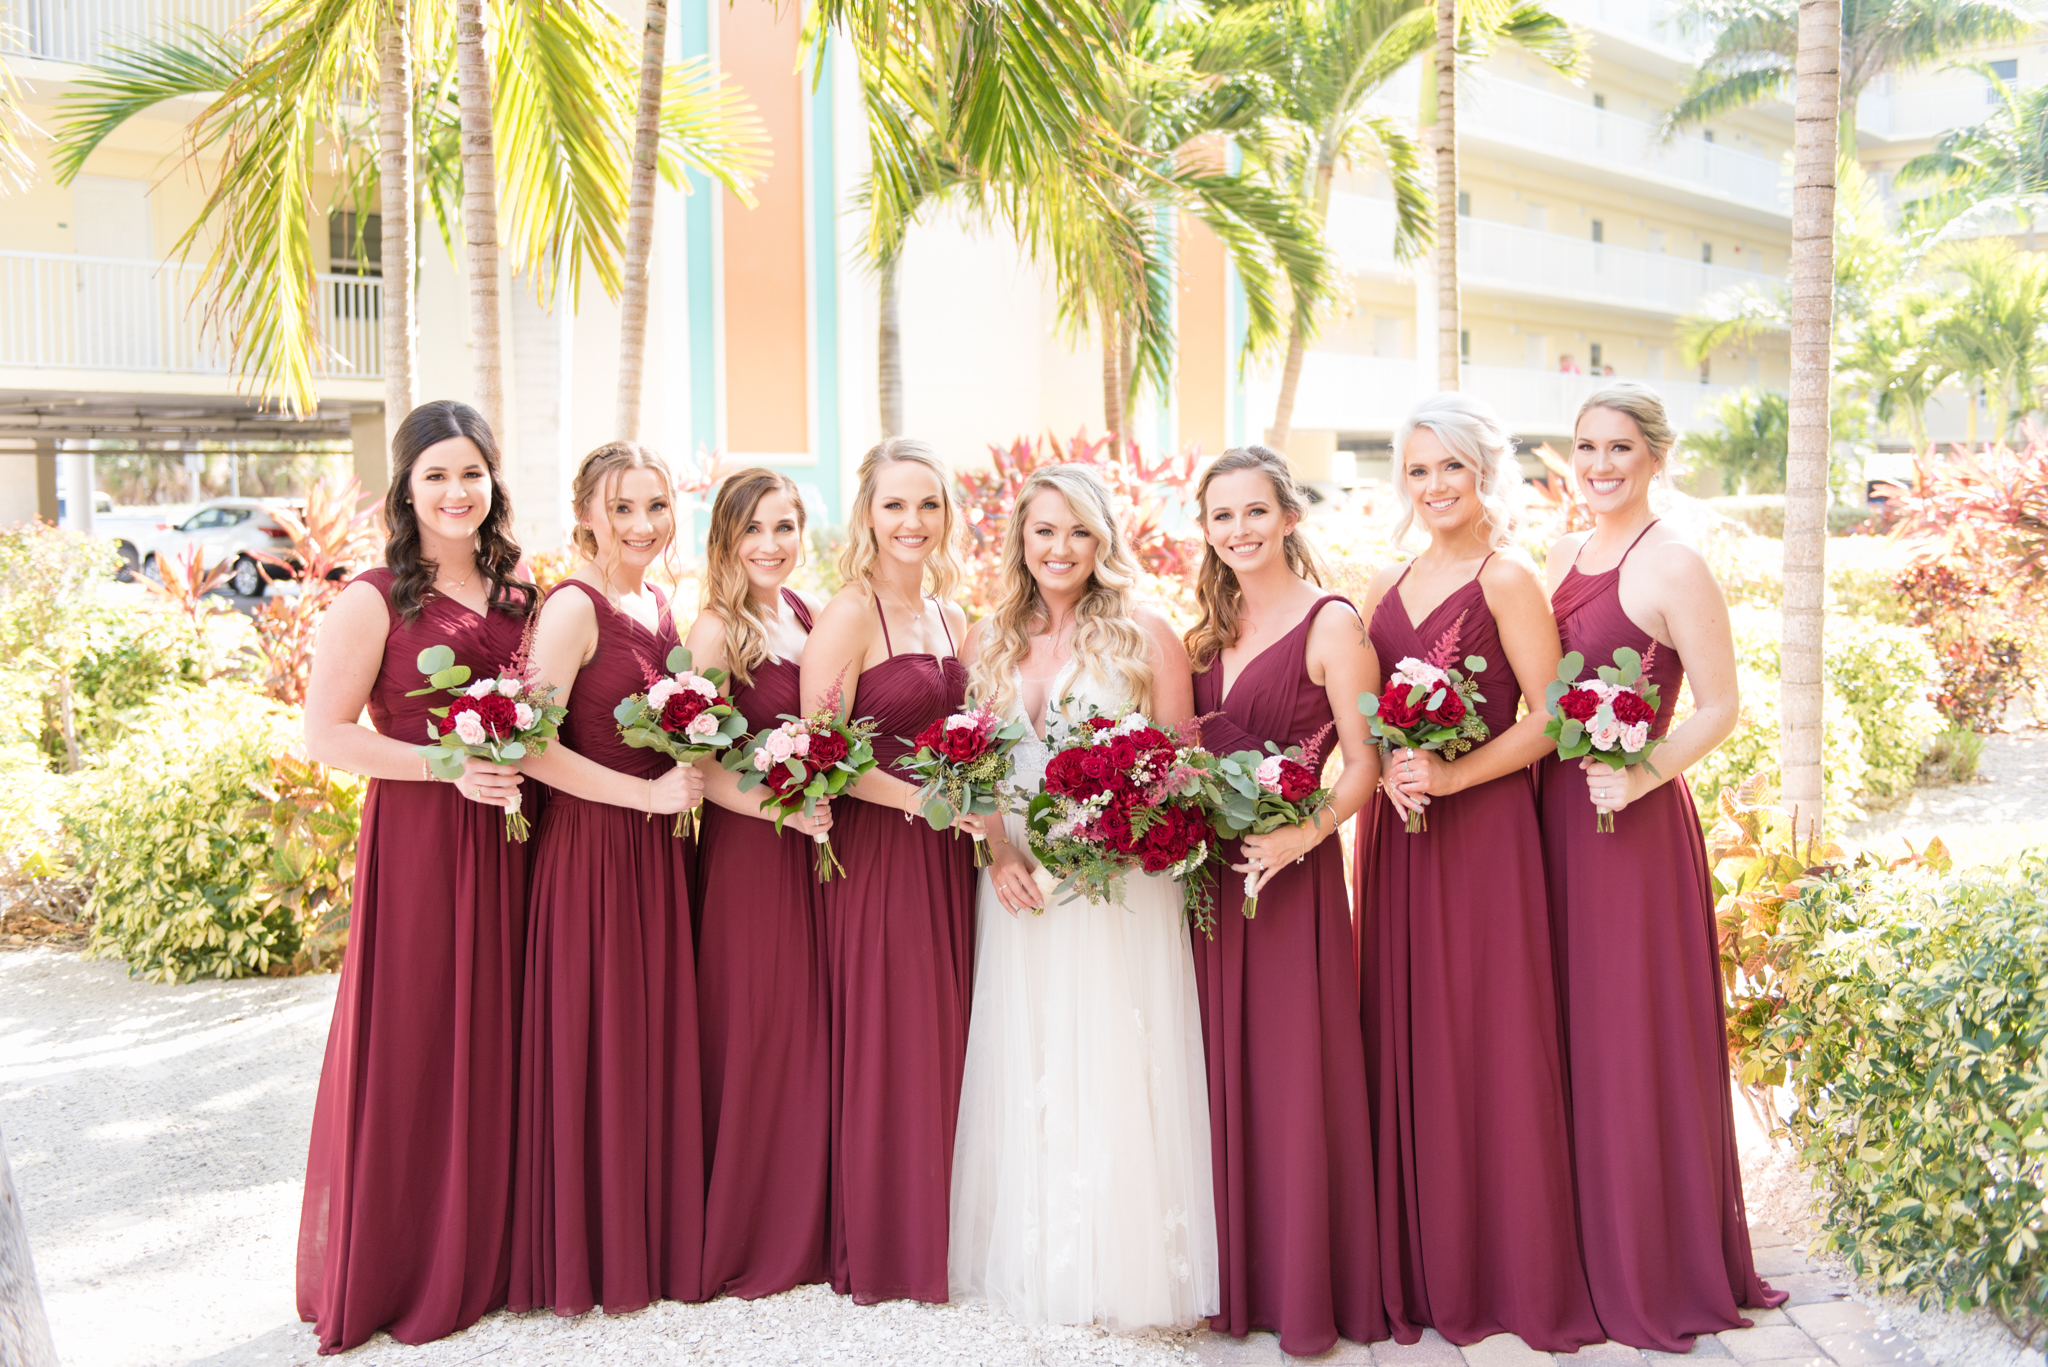 Bridal party smiles with in garden.